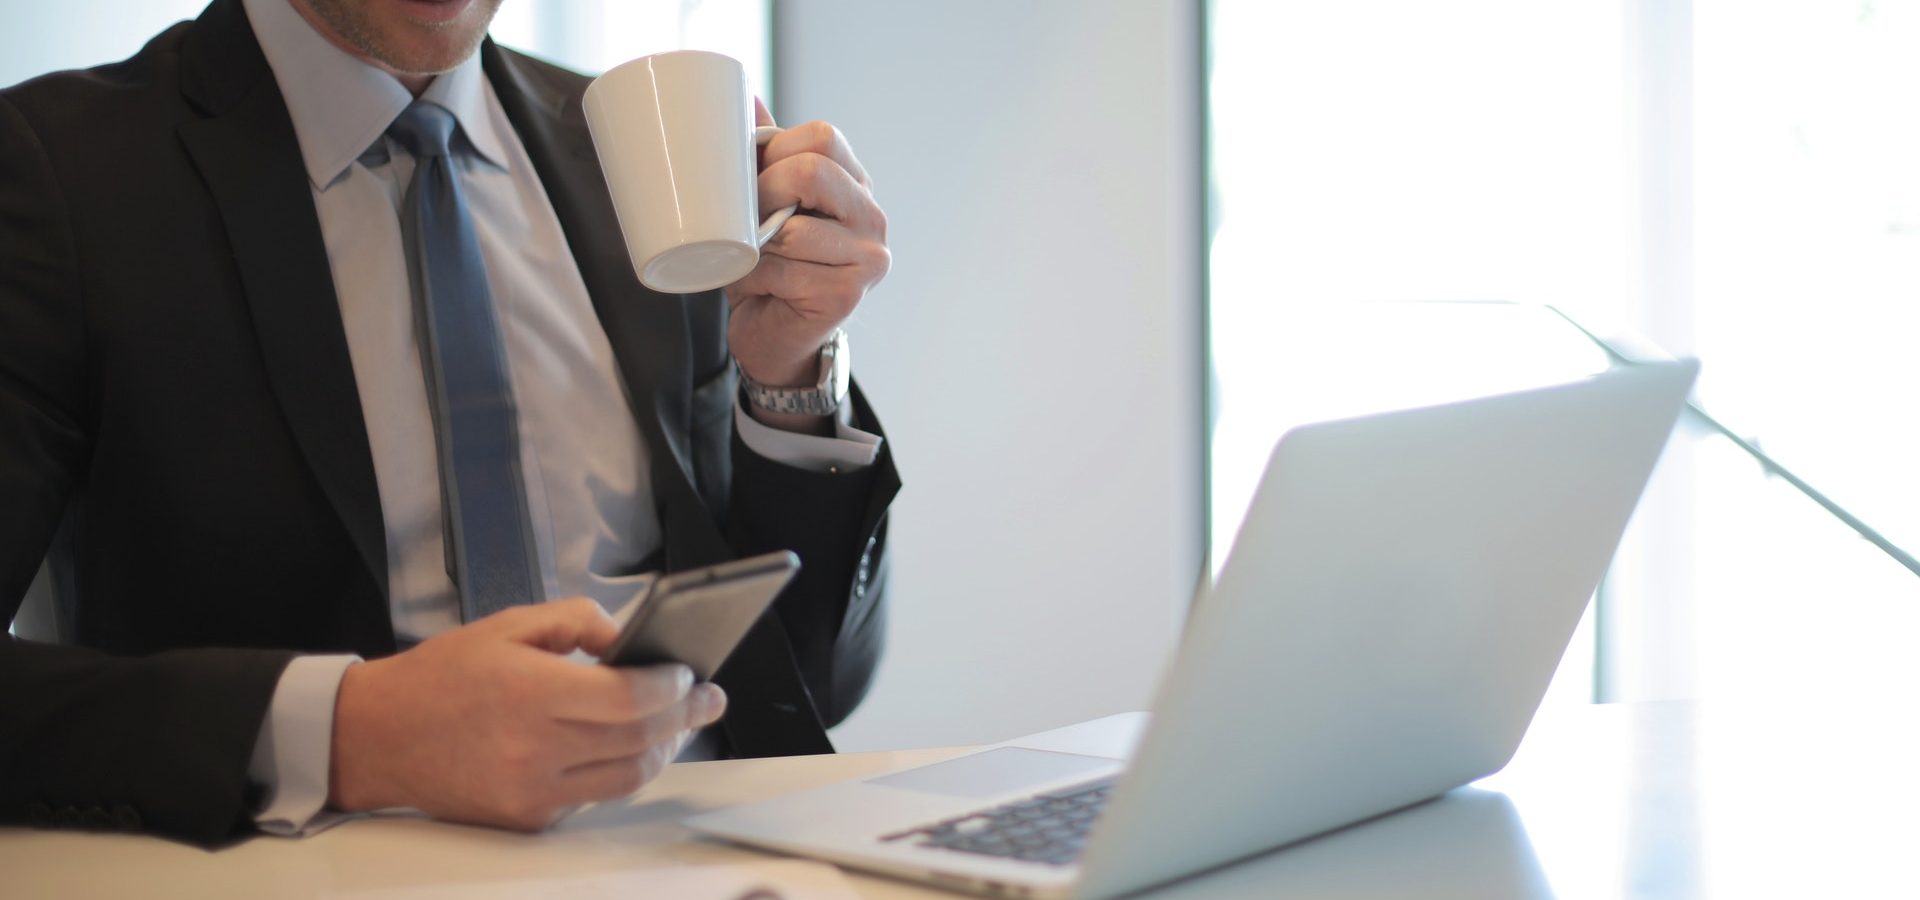 Man in black suit drinking coffee in front of laptop